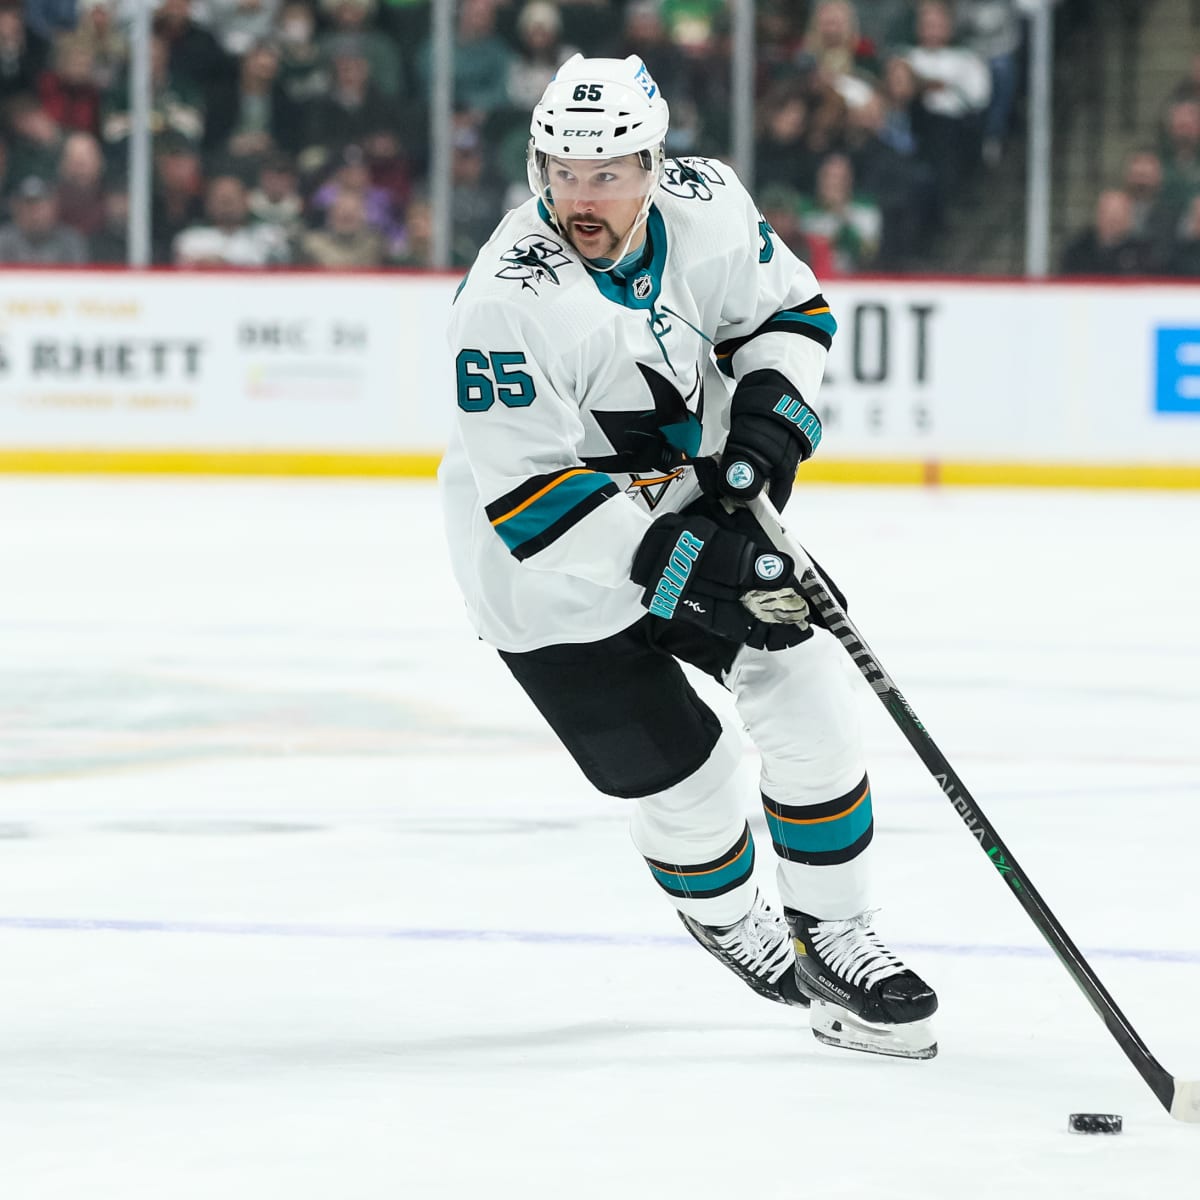 Sharks GM anticipates Karlsson staying put for rest of season